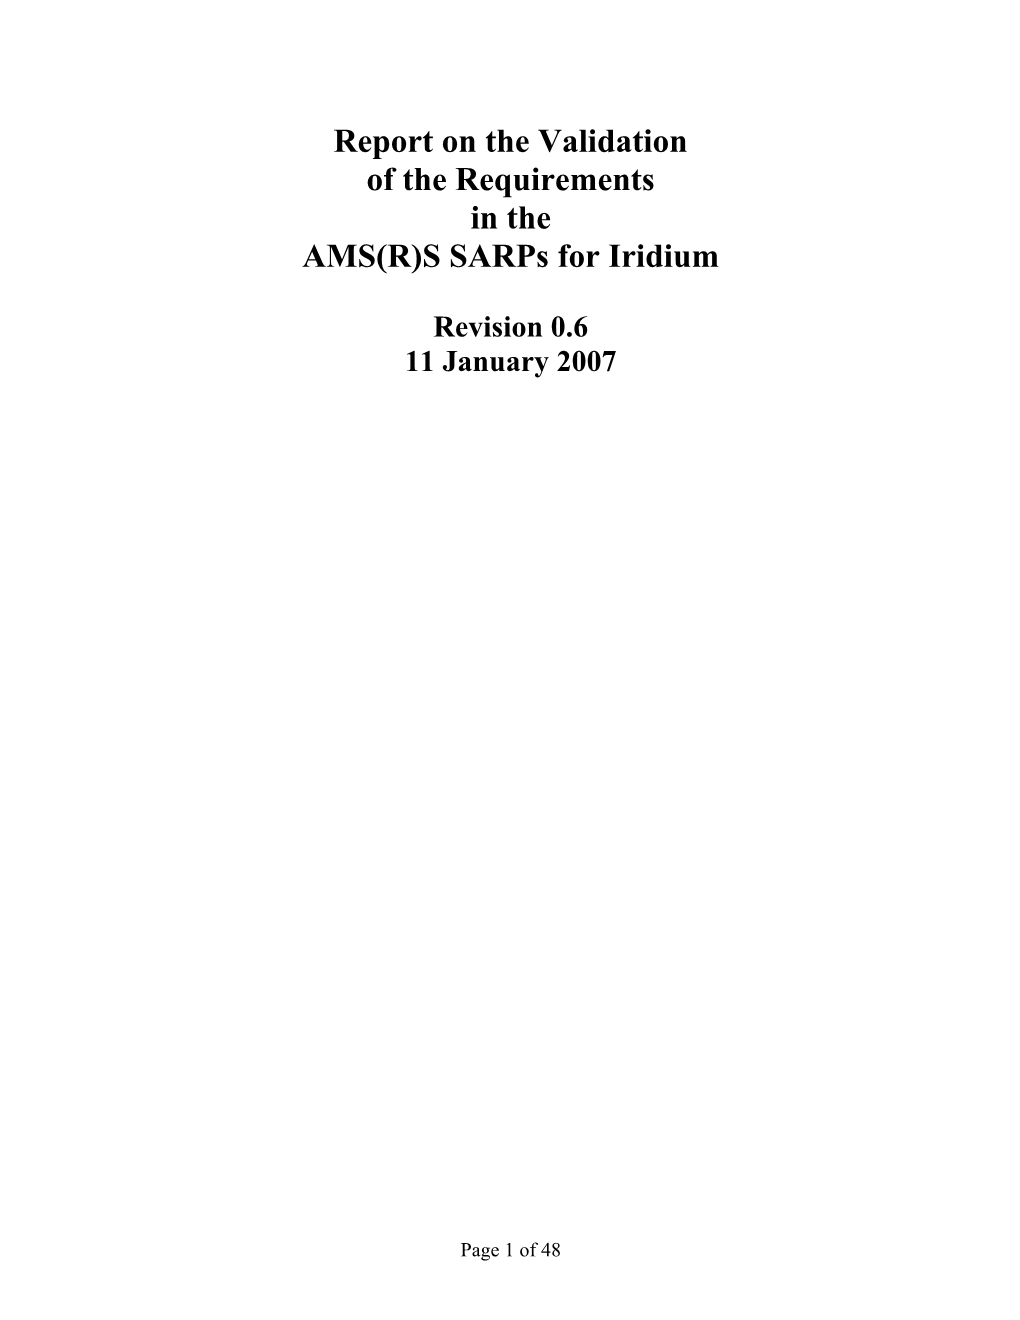 Report on the Validation of the Requirements in the AMS(R)S Sarps for Iridium - Revision 0.6